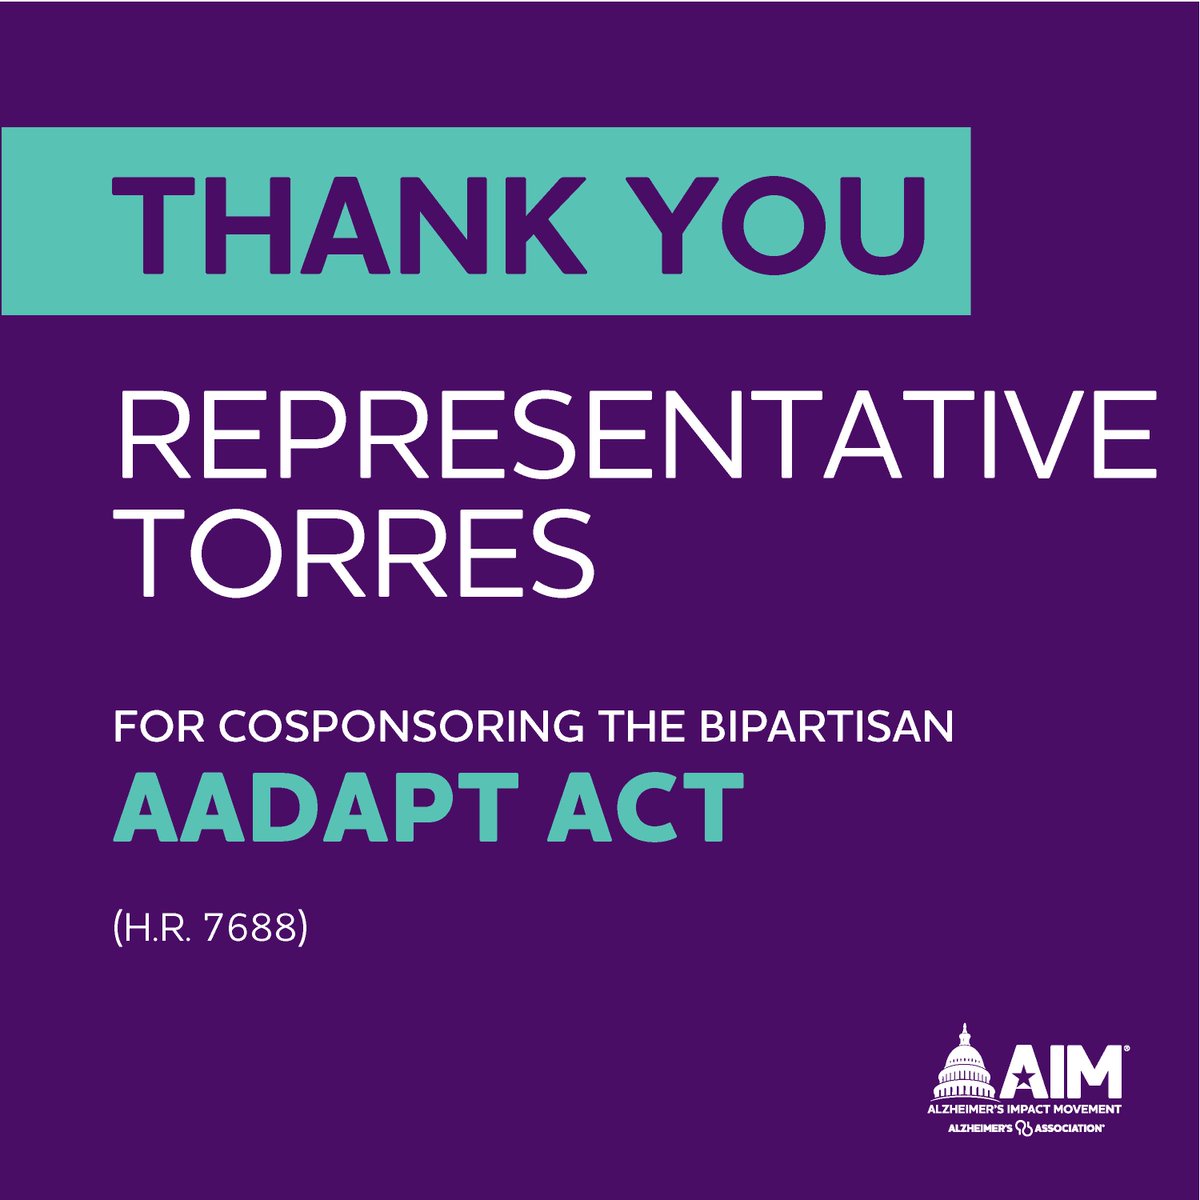 Thank you, @RepRitchie, for cosponsoring the #AADAPTAct and for supporting the Alzheimer’s and dementia community by helping to improve dementia training and education for primary care providers.